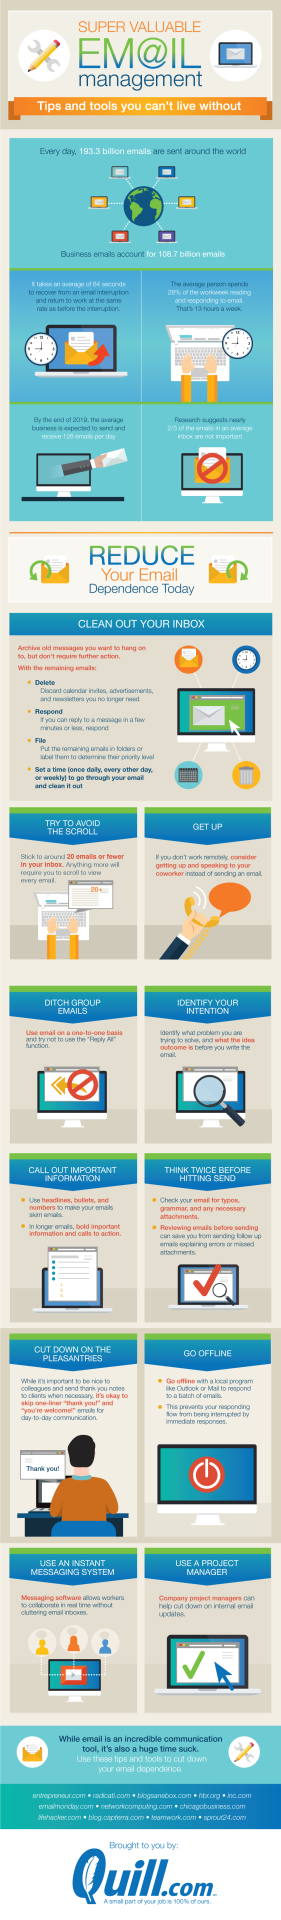 email management infographic